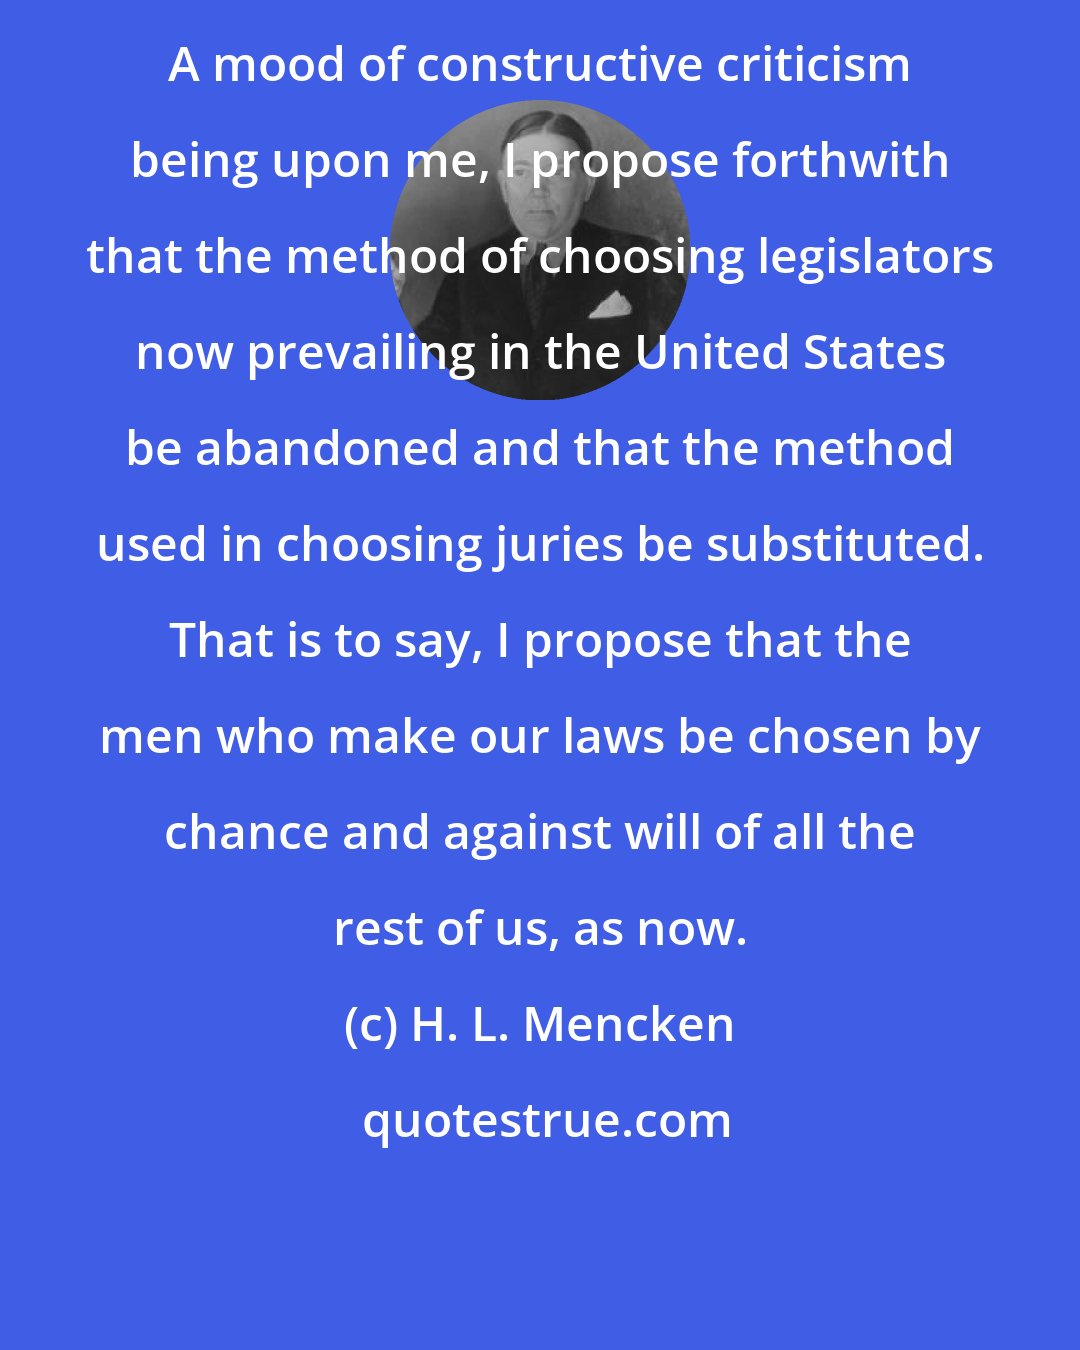 H. L. Mencken: A mood of constructive criticism being upon me, I propose forthwith that the method of choosing legislators now prevailing in the United States be abandoned and that the method used in choosing juries be substituted. That is to say, I propose that the men who make our laws be chosen by chance and against will of all the rest of us, as now.